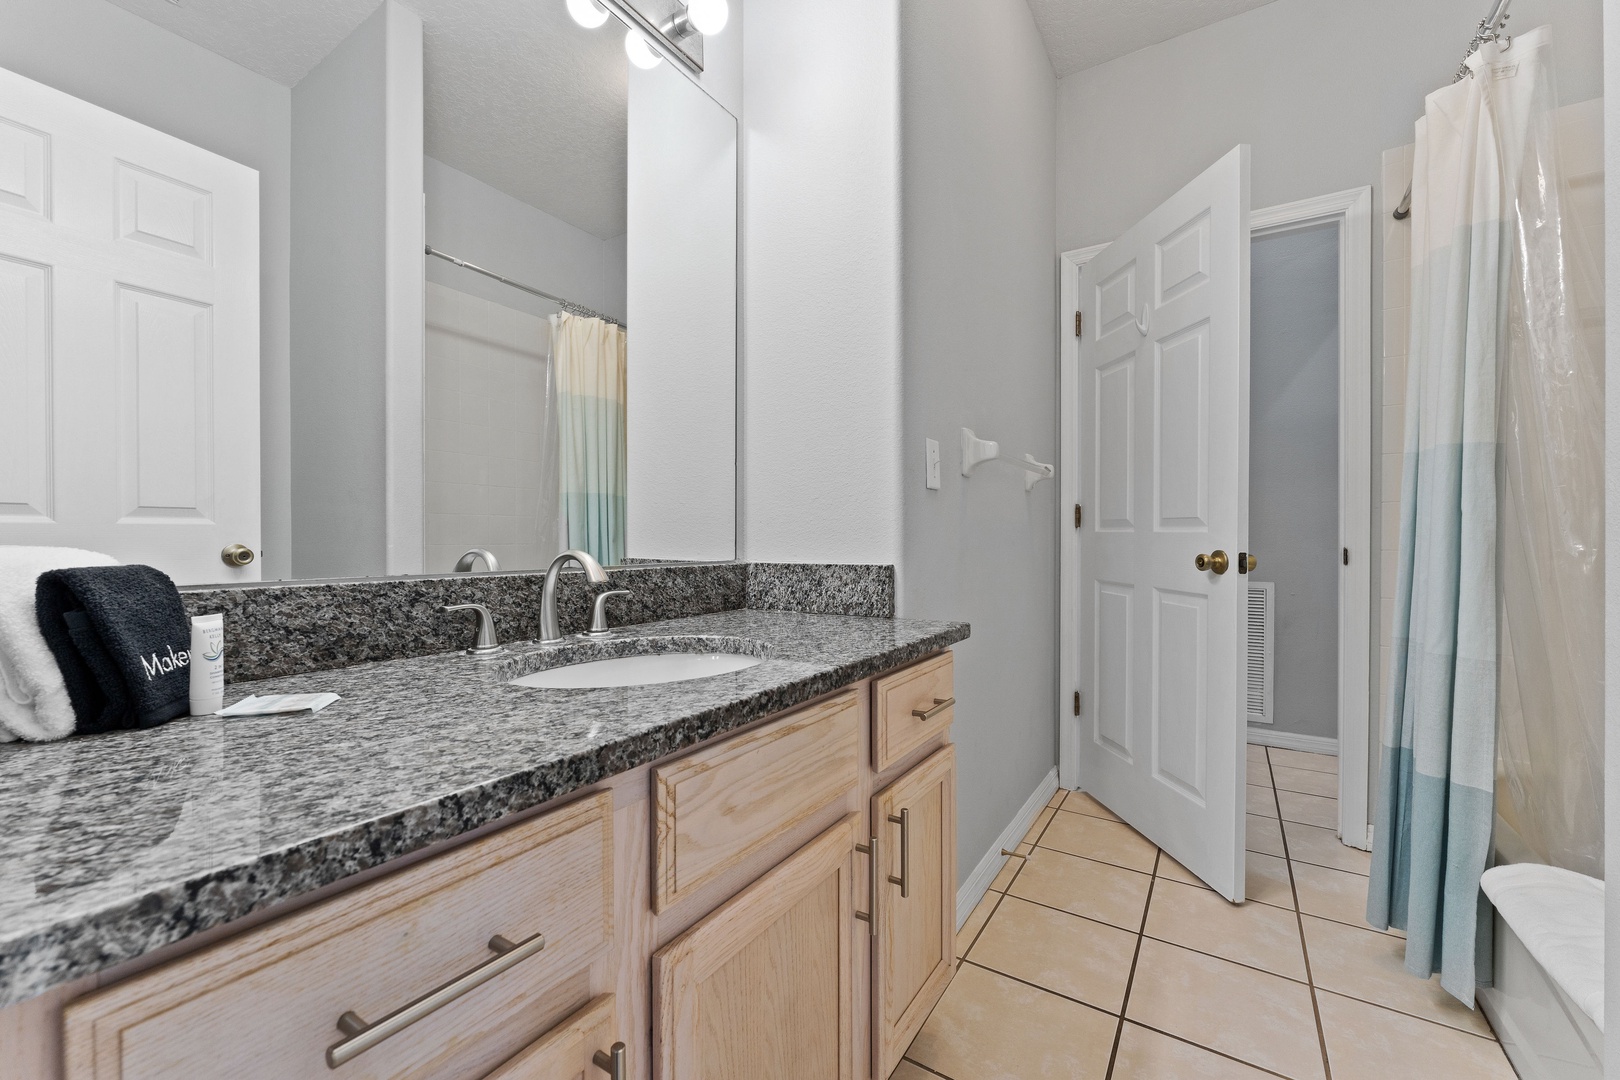 The shared full bathroom includes a large single vanity & shower/tub combo